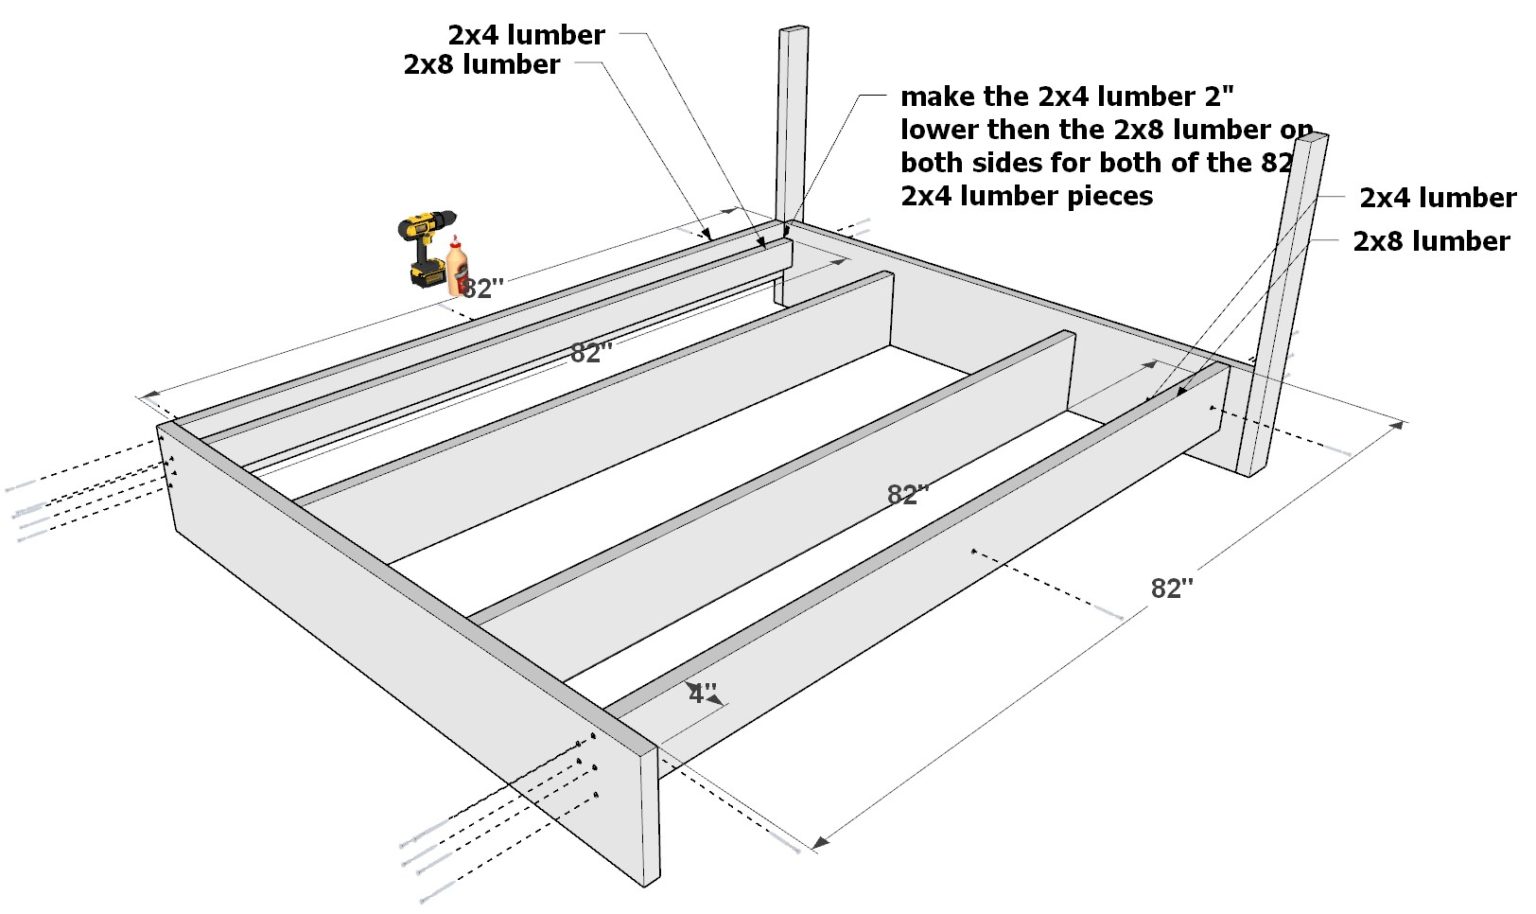 Diy Queen Over Queen Loft Bed Plan Step By Step Pdf Guide For Easy Woodworking Diy Projects Plans